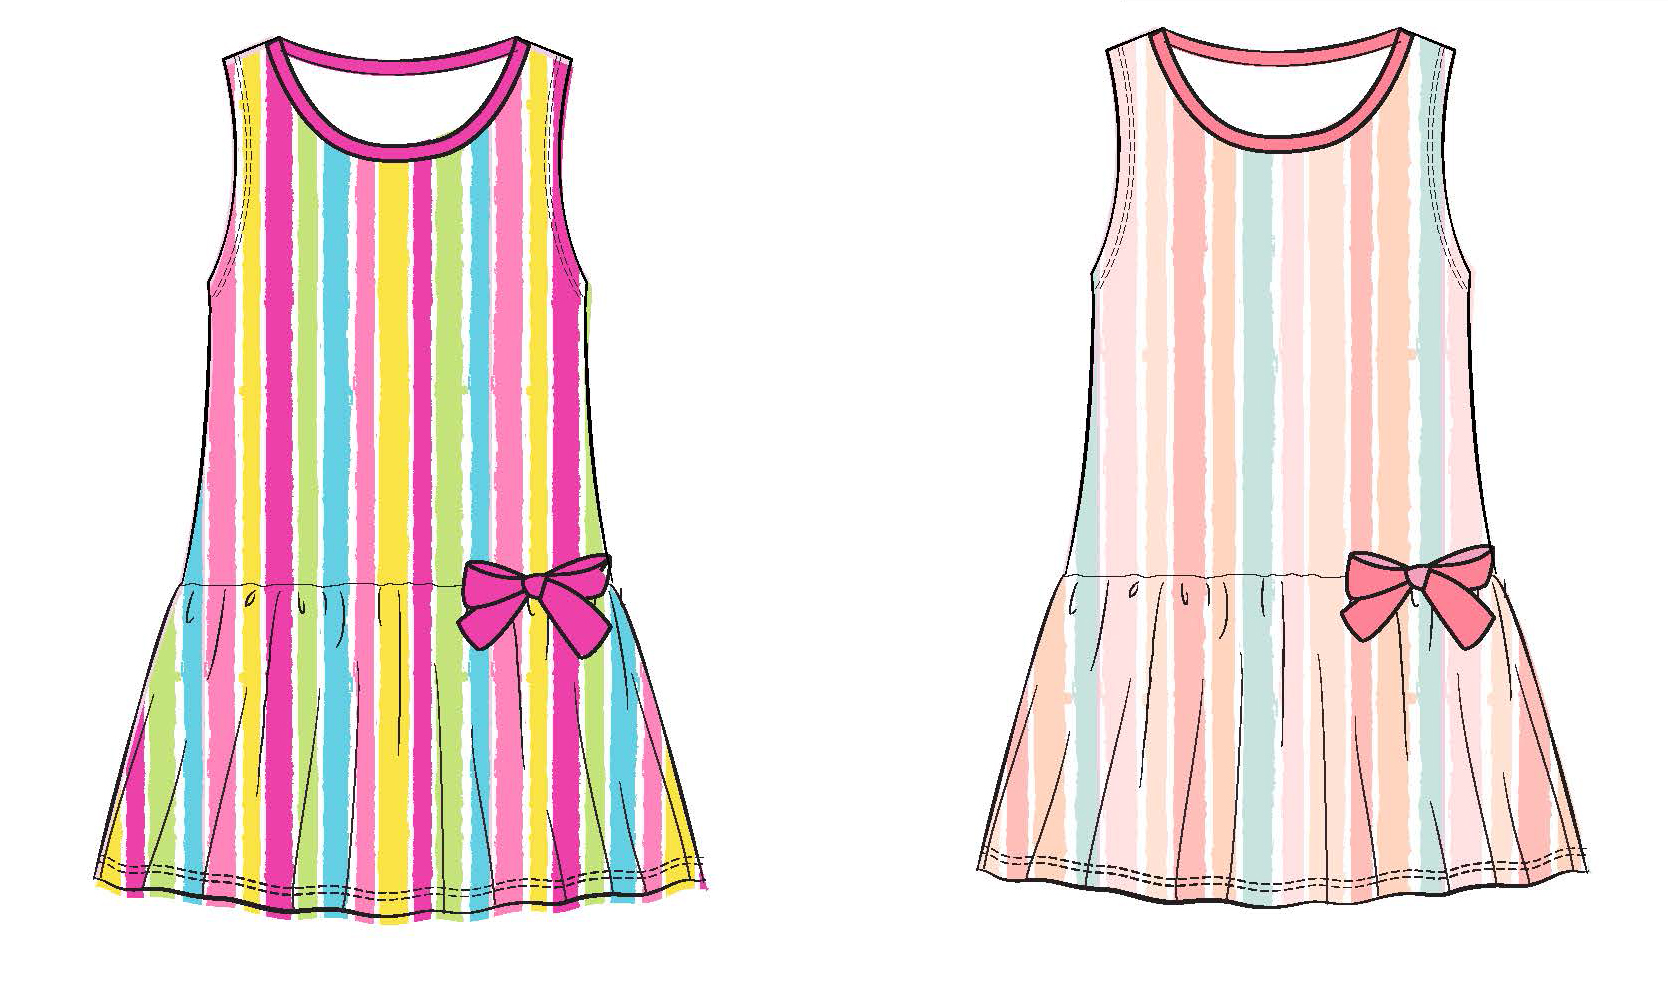 Baby Girl's Sleeveless Knit Swing DRESS w/ Embroidered Bow - Two Tone Rainbow Stripes - Size 0/3M-9M